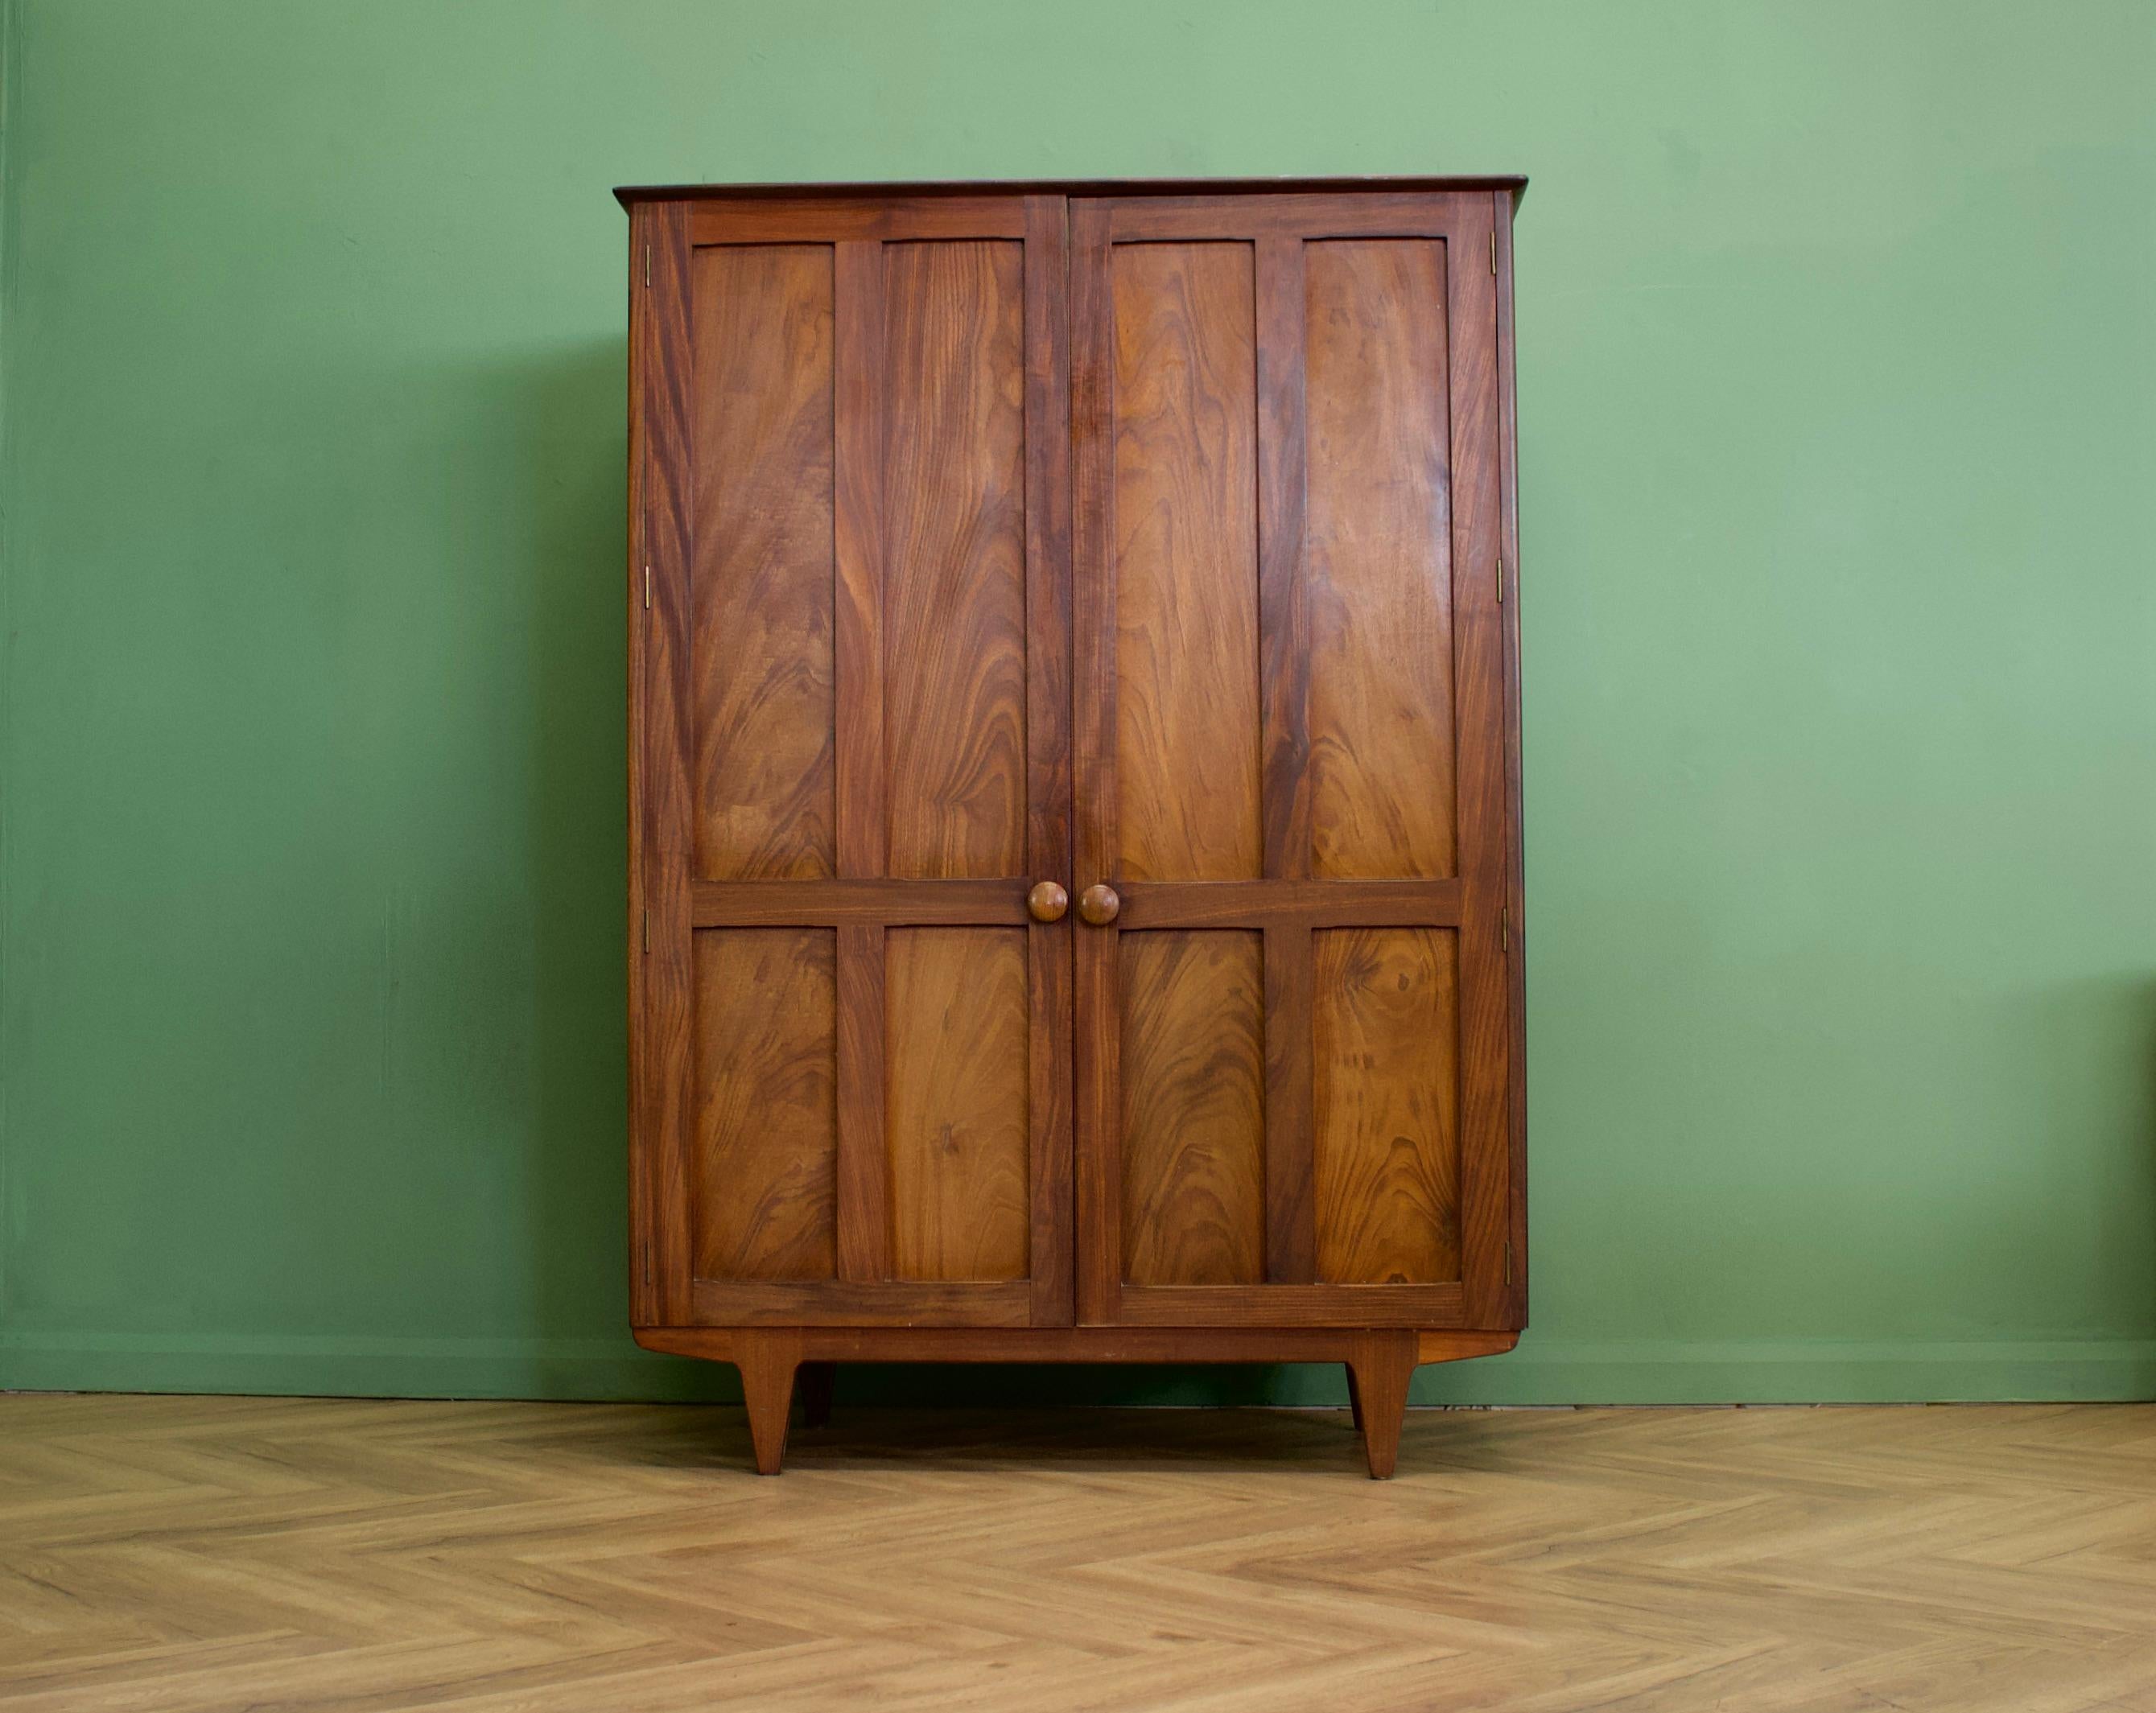 A dark teak freestanding wardrobe by John Herbert for Younger - circa late 1950s -
Internally there is a hanging rail the full width
The attractive legs are tapered and the handles are solid teak
This is a beautiful quality piece